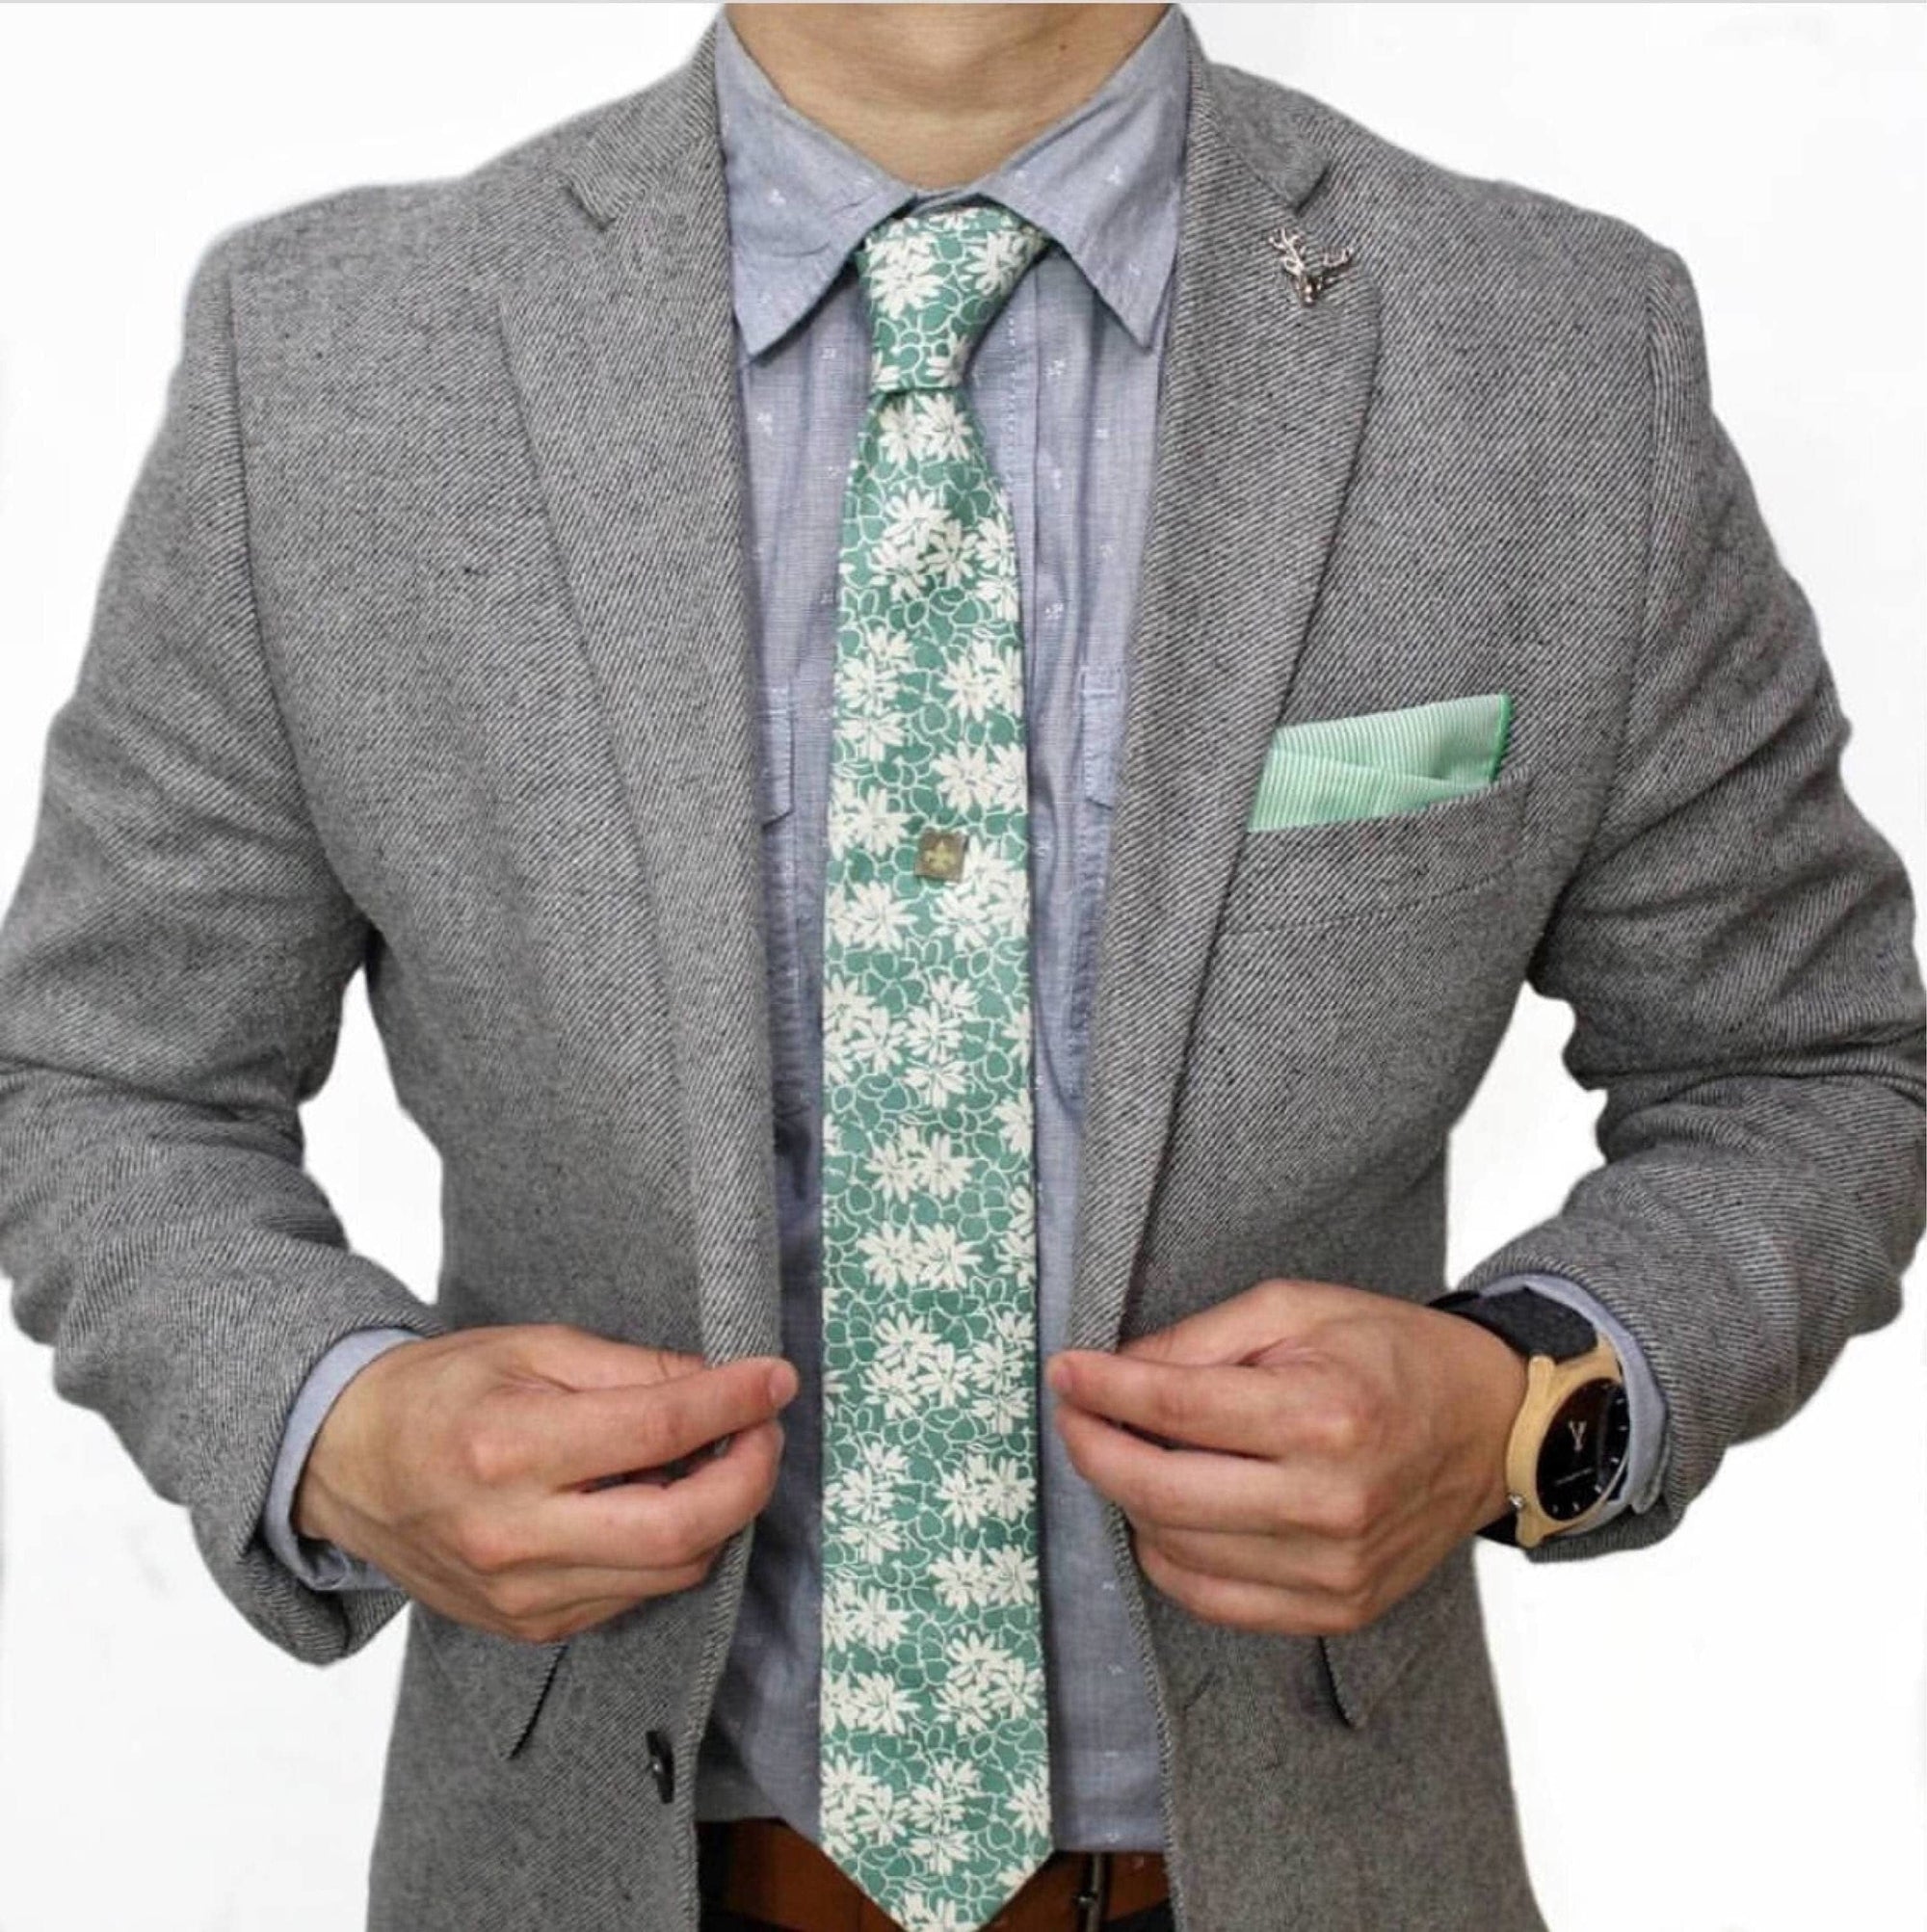 Green Floral Tie COOPER-Neckties-Green Floral Tie COOPER Floral Necktie for weddings and events great for prom and gifts Mens ties near me us tie shops cool skinny slim flower ideas-Mytieshop. Skinny ties for weddings anniversaries. Father of bride. Groomsmen. Cool skinny neckties for men. Neckwear for prom, missions and fancy events. Gift ideas for men. Anniversaries ideas. Wedding aesthetics. Flower ties. Dry flower ties.